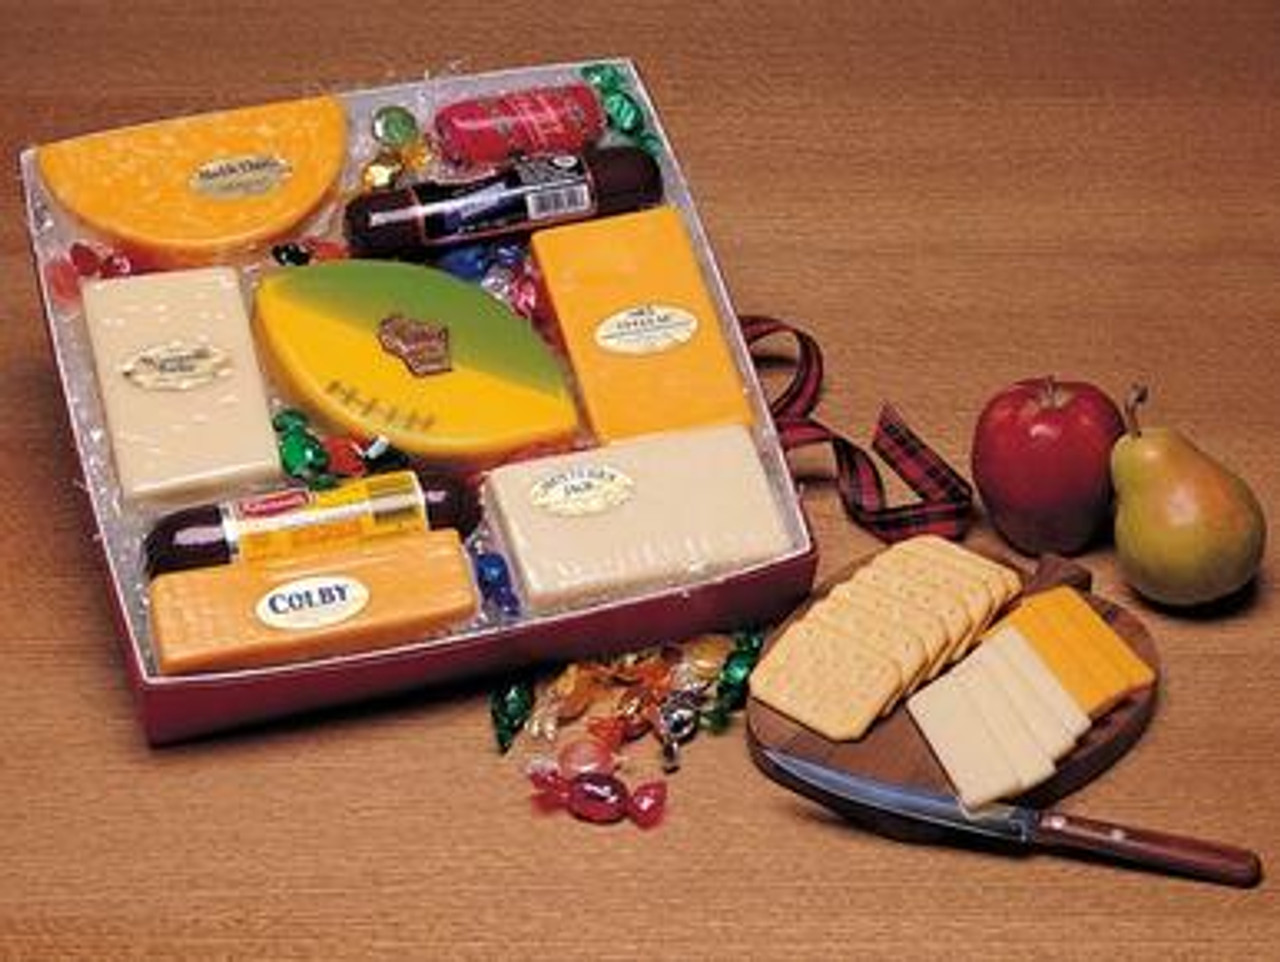 Wisconsin Cheese & Sausage gift boxes, Party platters